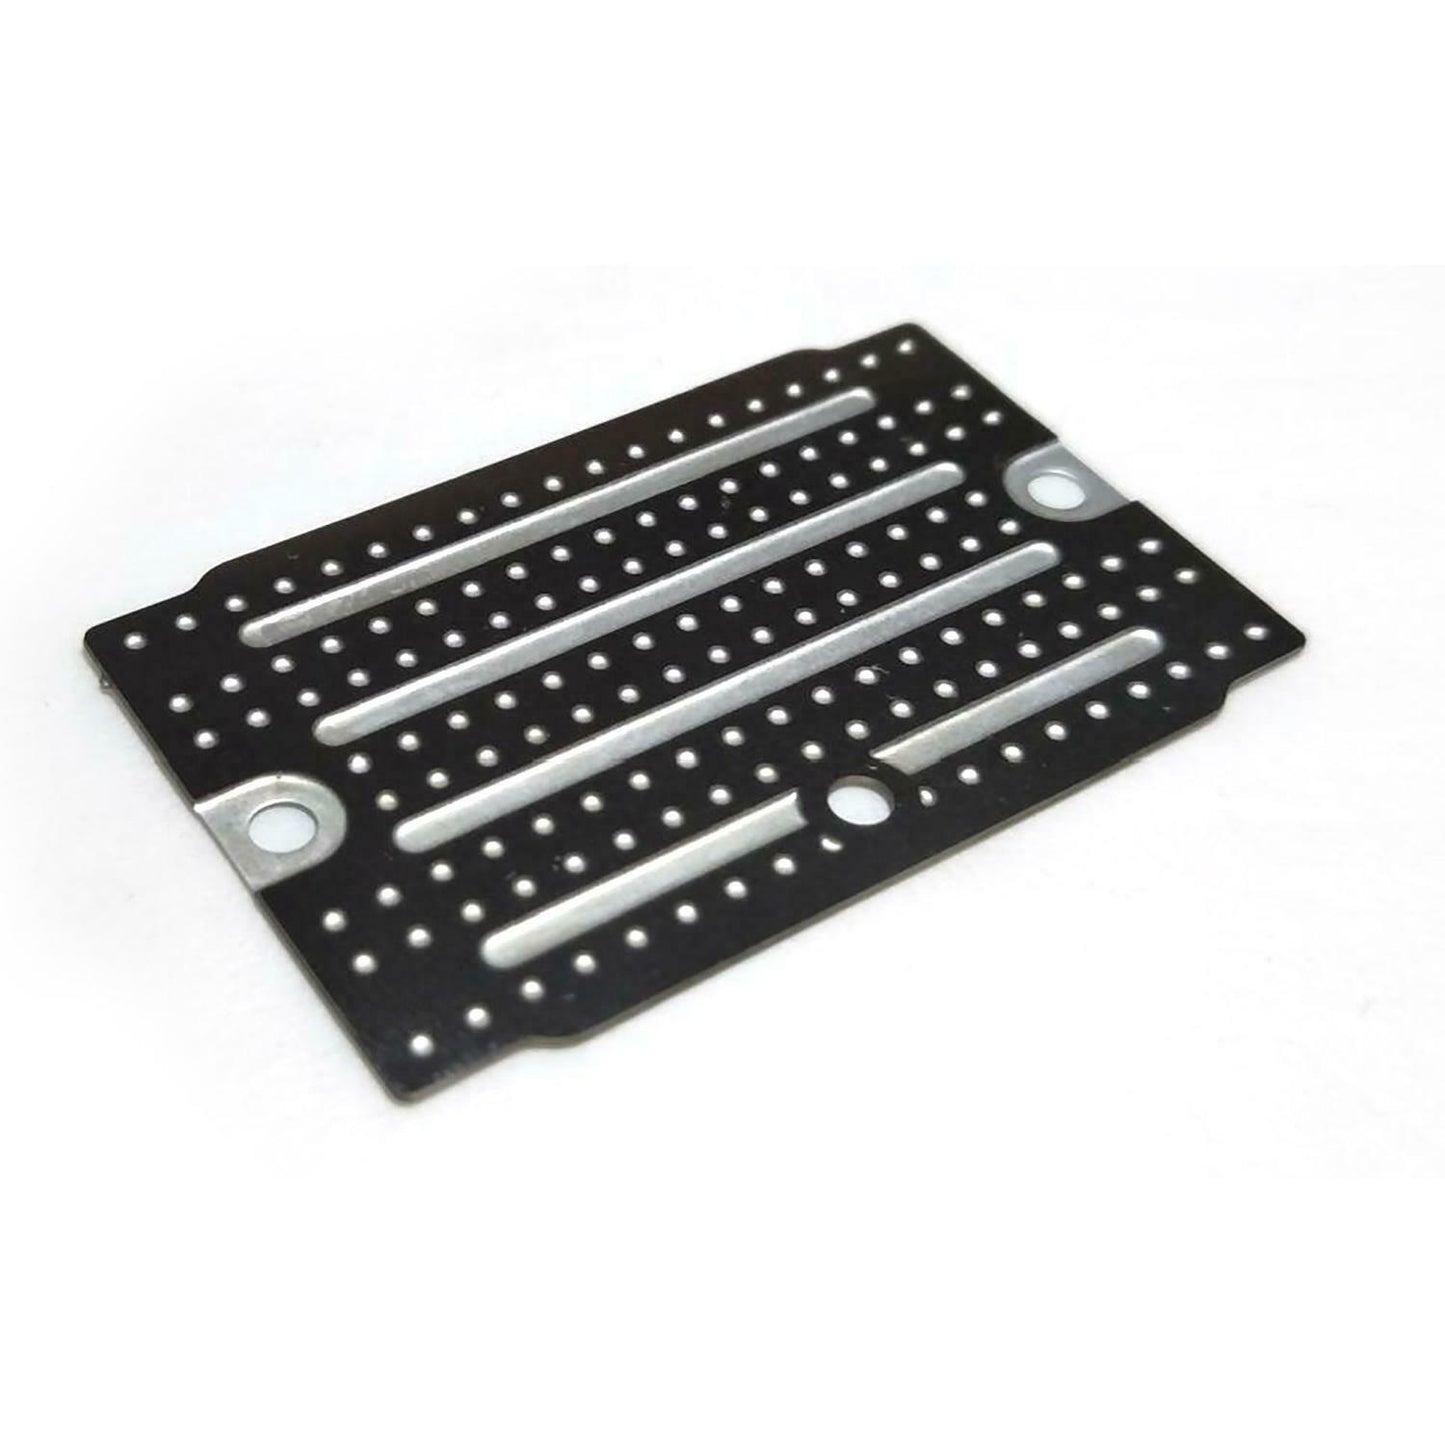 Degree Scale Model Spare Part Stainless Steel Traction Base Pedal for 1:14 1581 Radio Controlled Trucks RC Car DIY Model